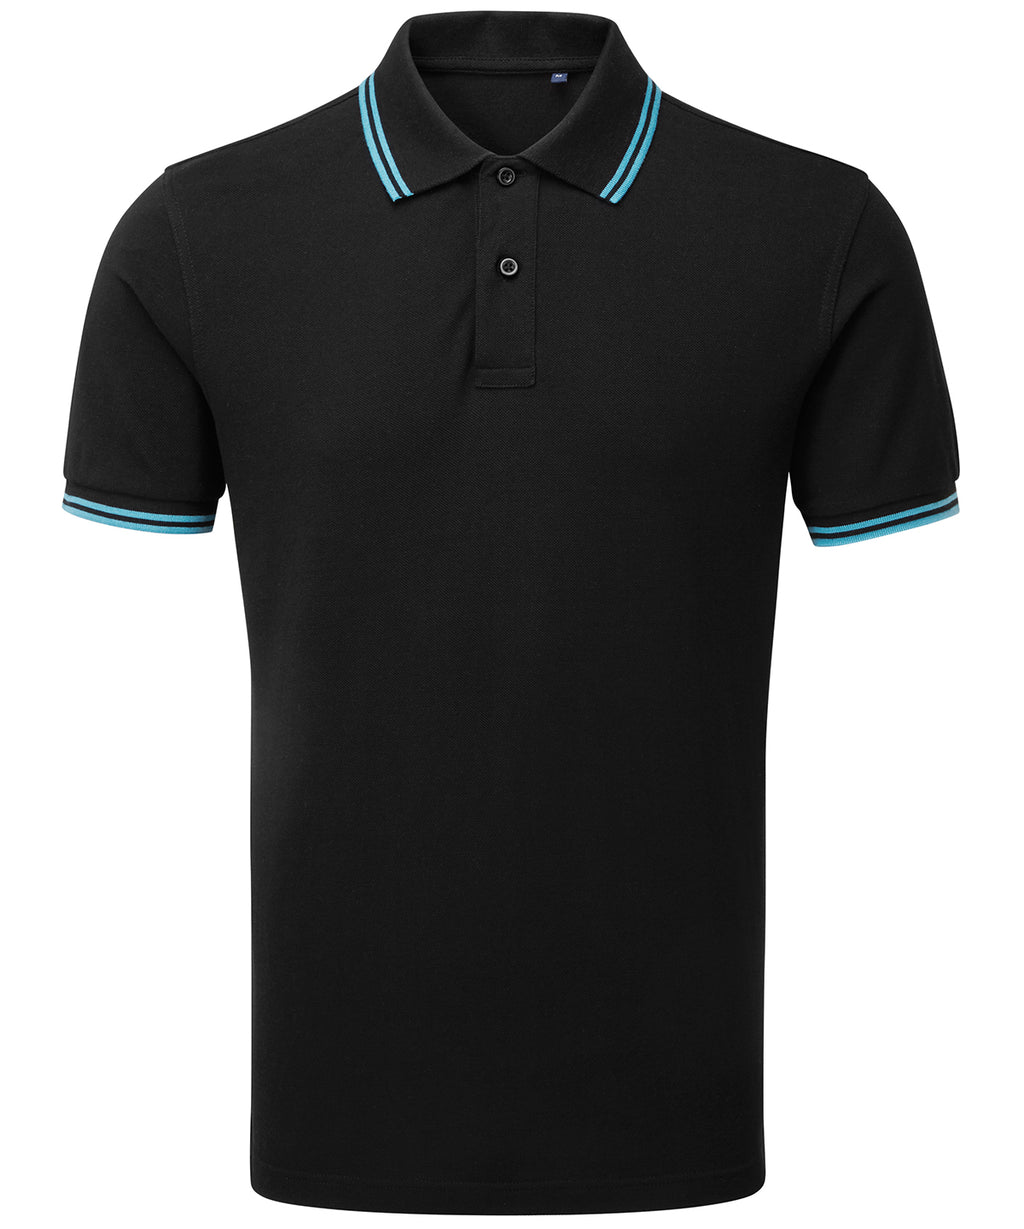 Mens Tipped Short Sleeve Polo Shirt - Black/Turquoise